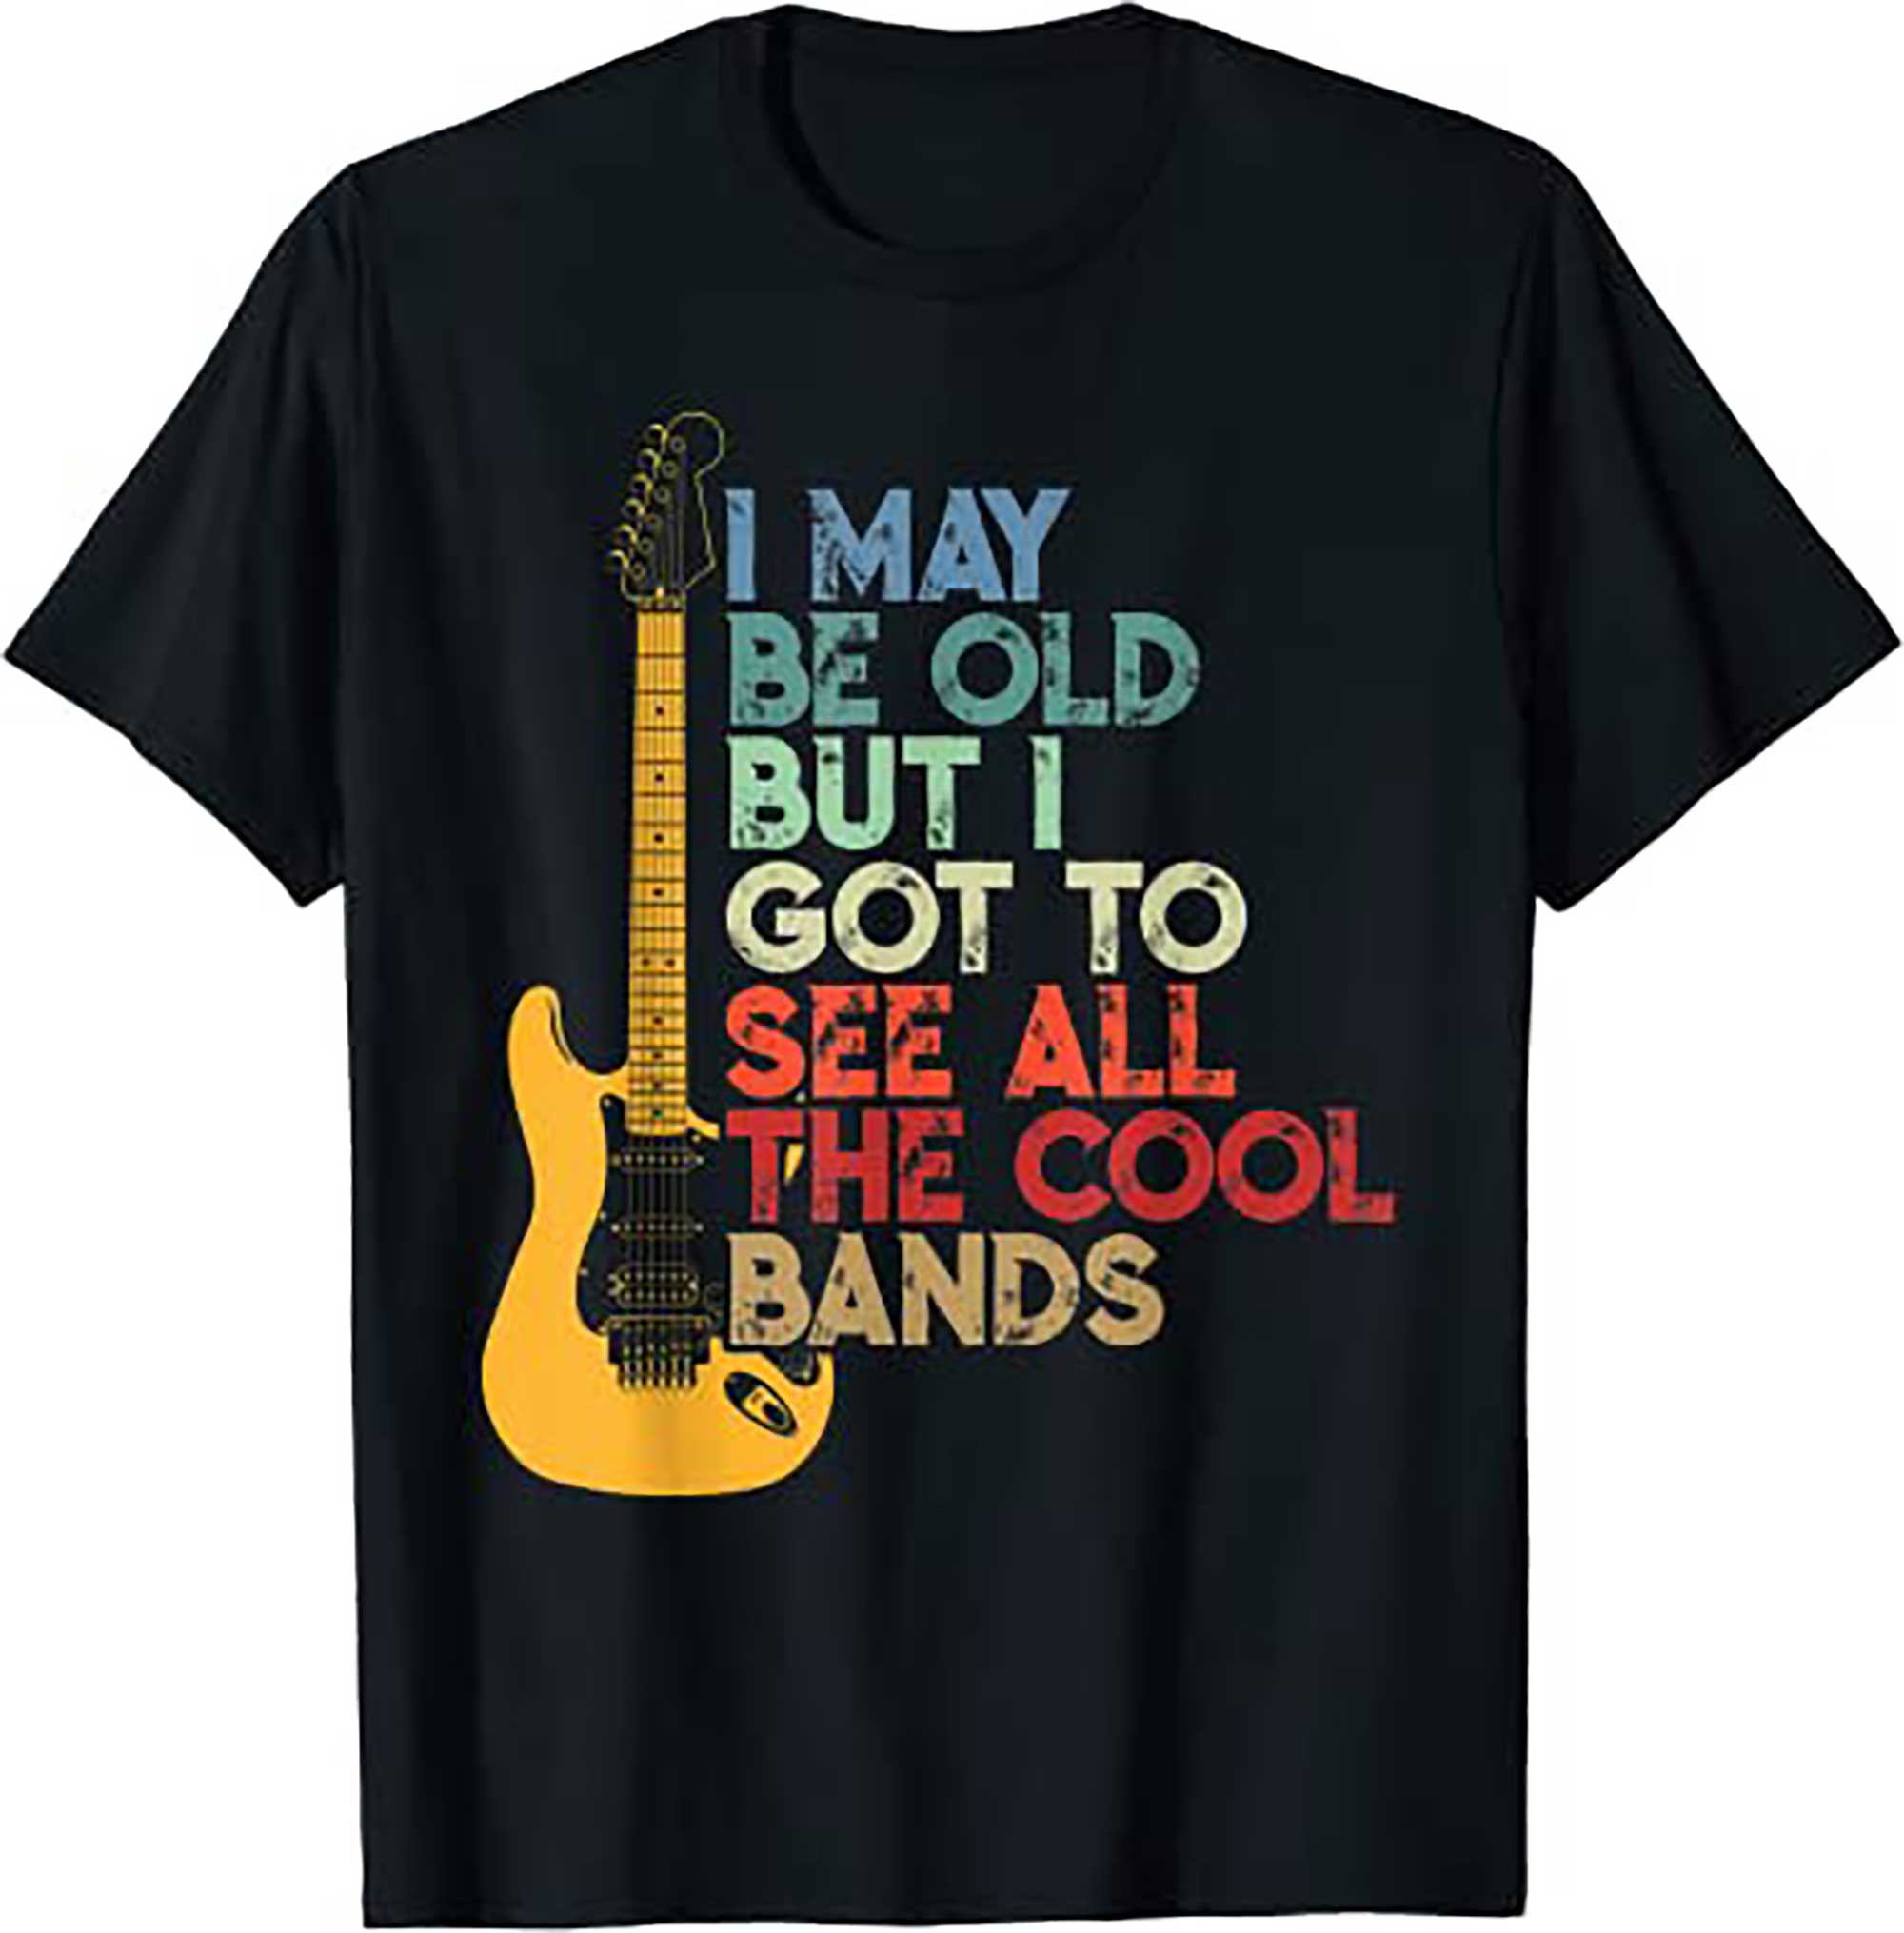 Skitongifts I May Be Old But I Got To See All The Cool Bands T Shirt